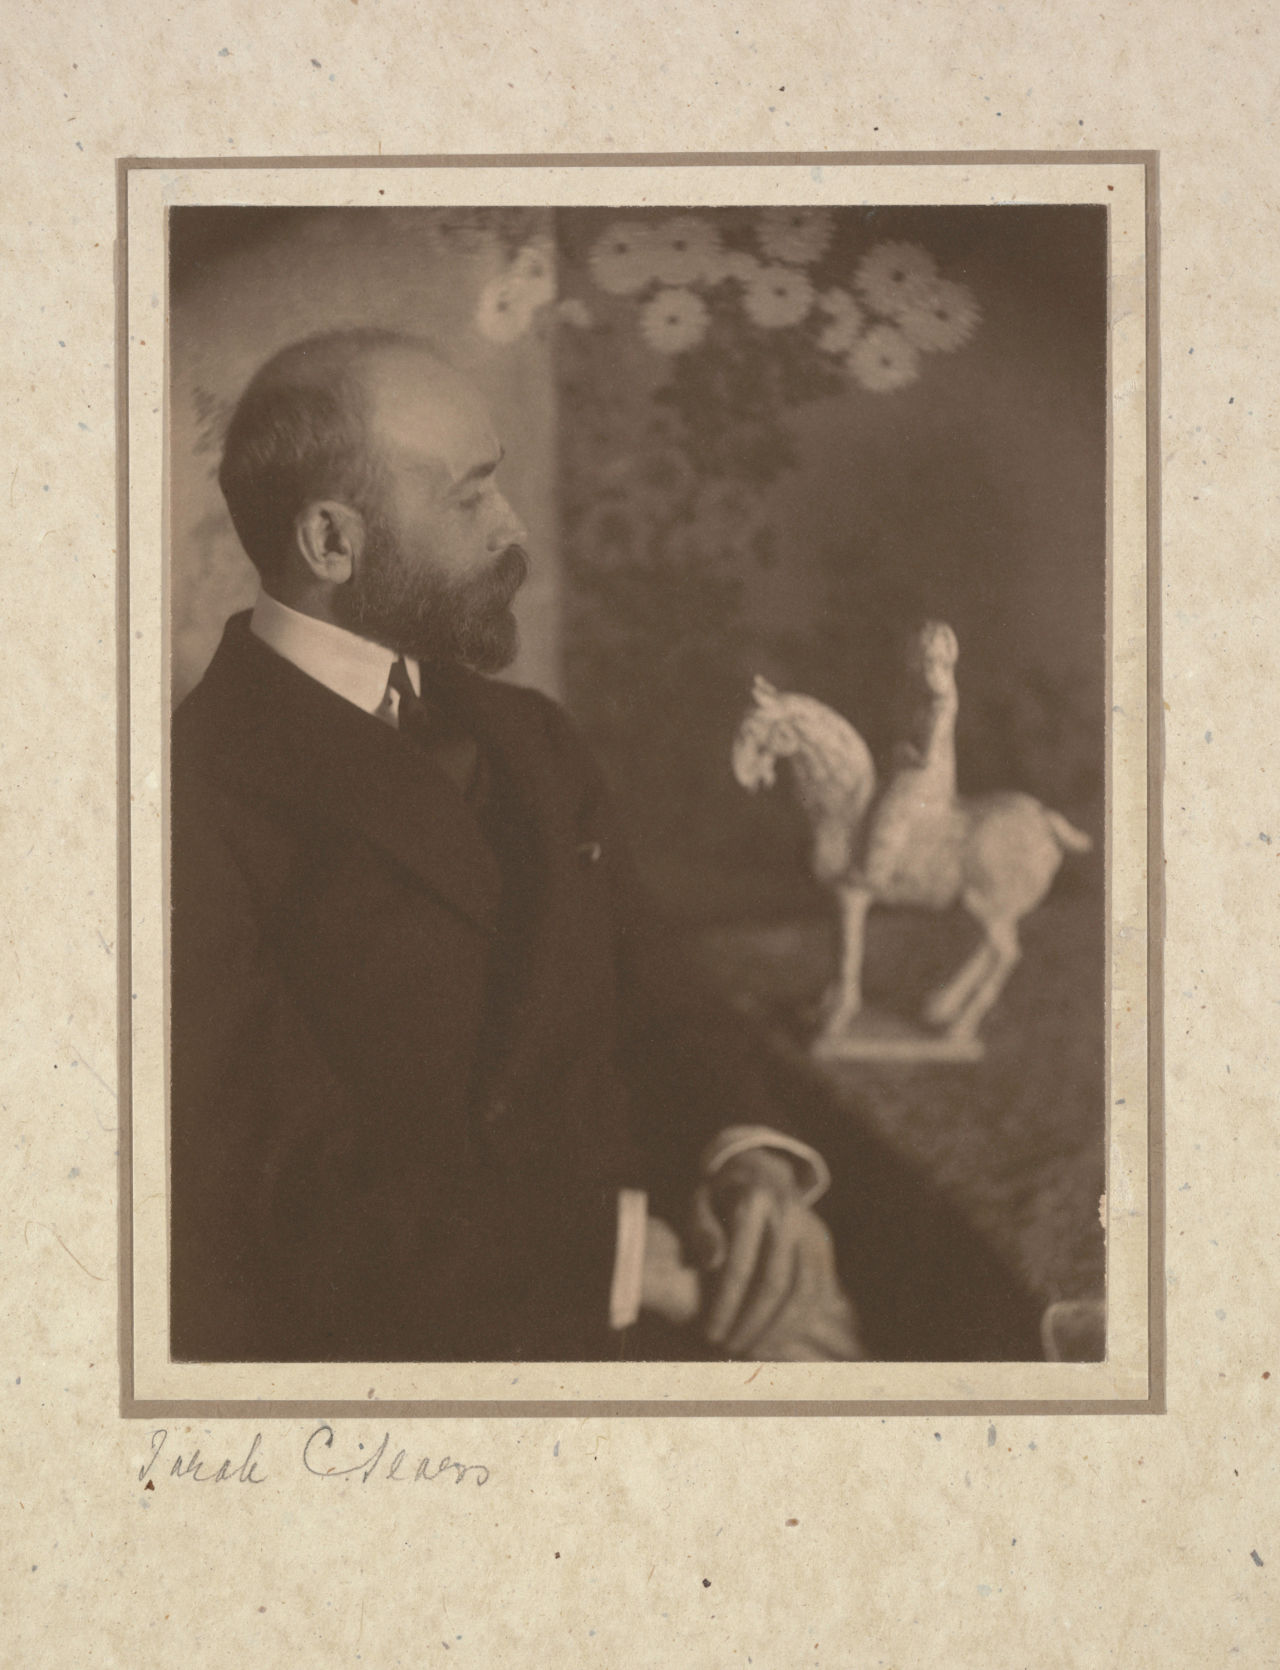 A platinum print of Bernard Berenson, 1903-1906, by Sarah Choate Sears on display in the "Off the Wall" exhibition. (Courtesy Isabella Stewart Gardner Museum)